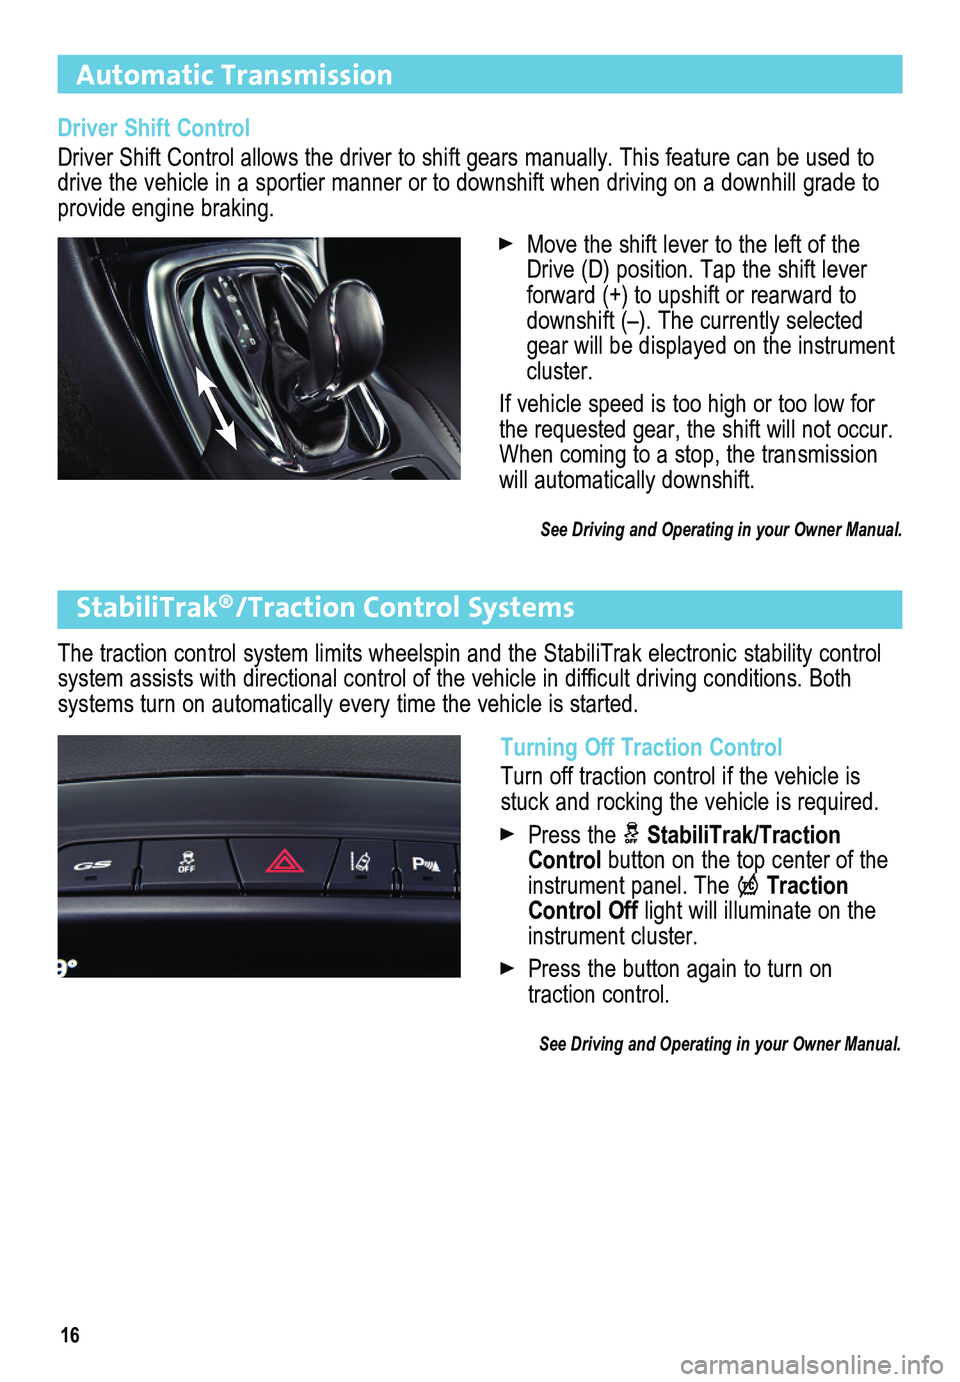 BUICK REGAL 2014  Get To Know Guide 16
Automatic Transmission  
StabiliTrak®/Traction Control Systems
The traction control system limits wheelspin and the StabiliTrak electro\
nic stability control system assists with directional contr